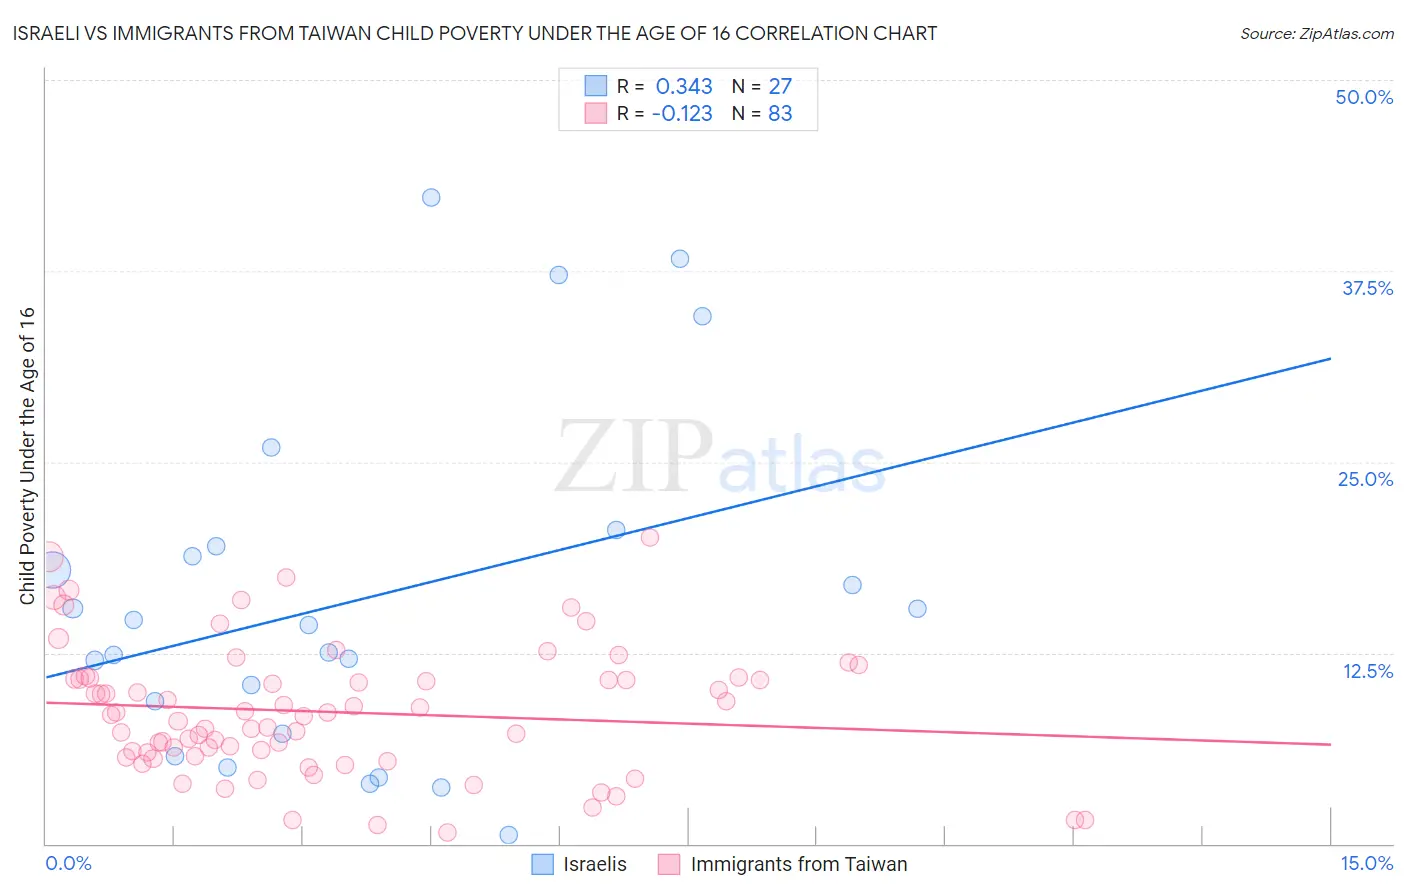 Israeli vs Immigrants from Taiwan Child Poverty Under the Age of 16